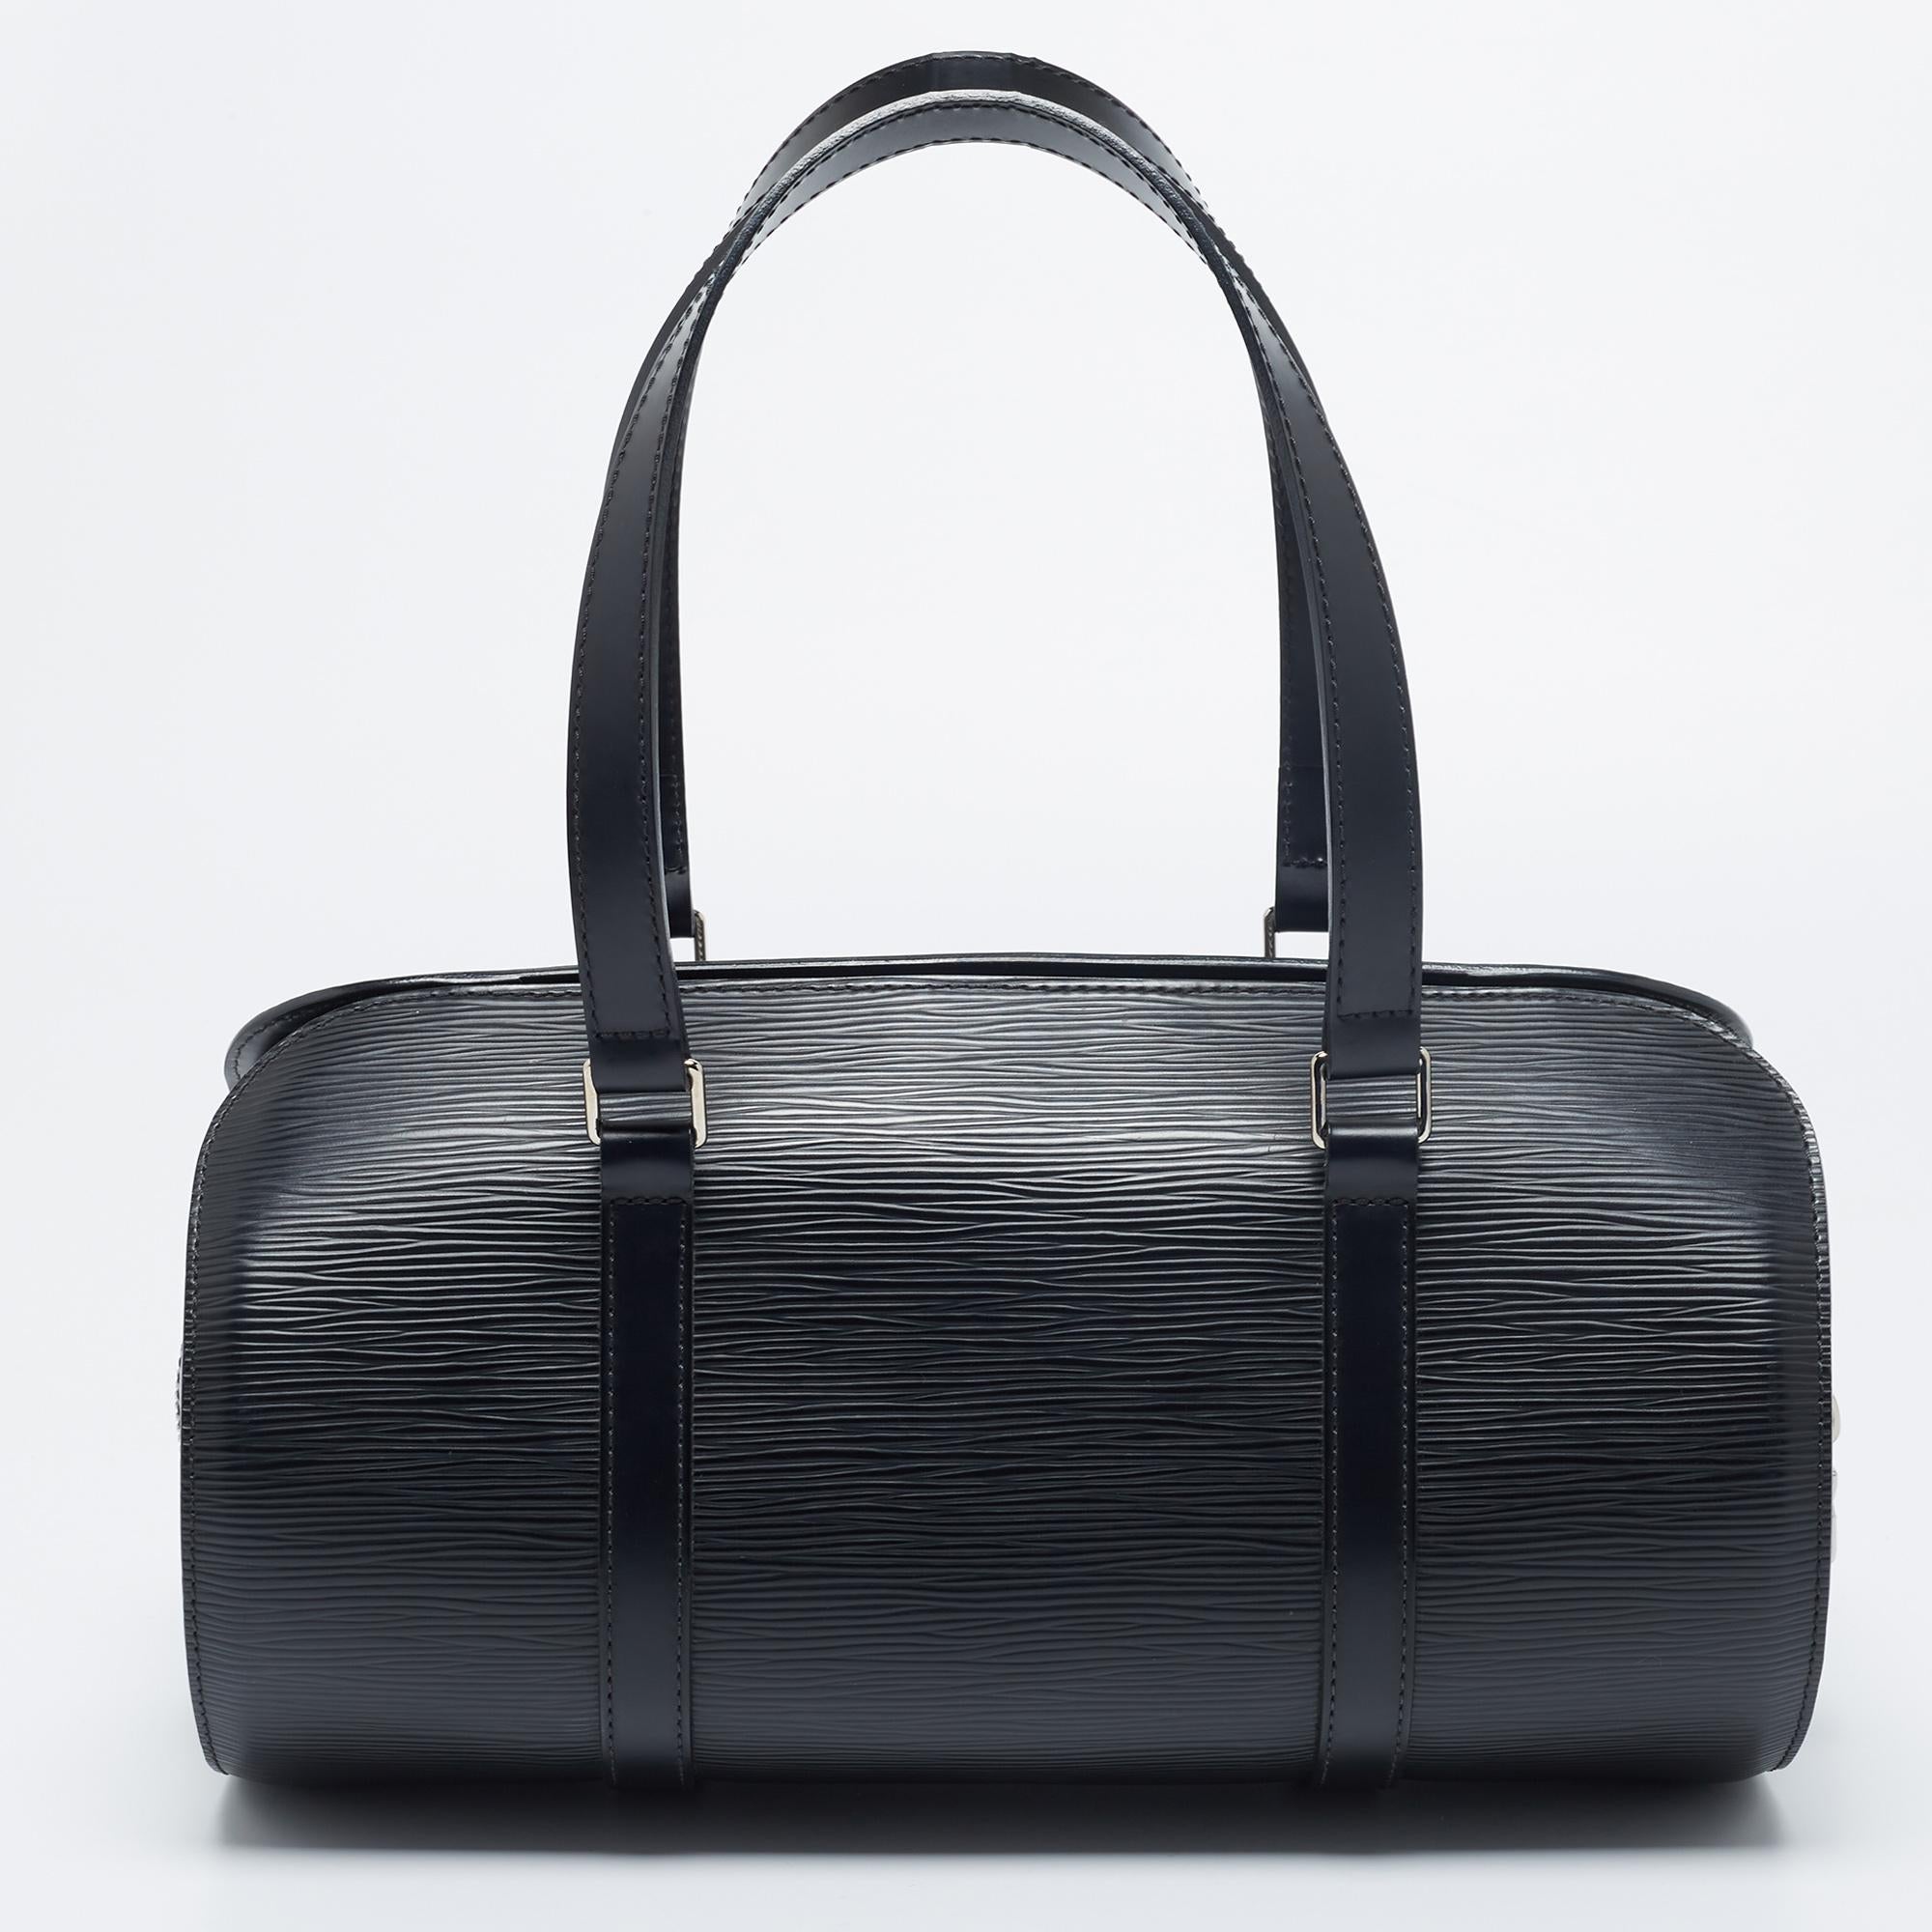 Another classic creation from the house of Louis Vuitton is this beautiful Papillon 30 bag. It is made from black Epi leather into a structured silhouette. It has dual handles, silver-toned hardware, and an Alcantara-lined interior. Chic and